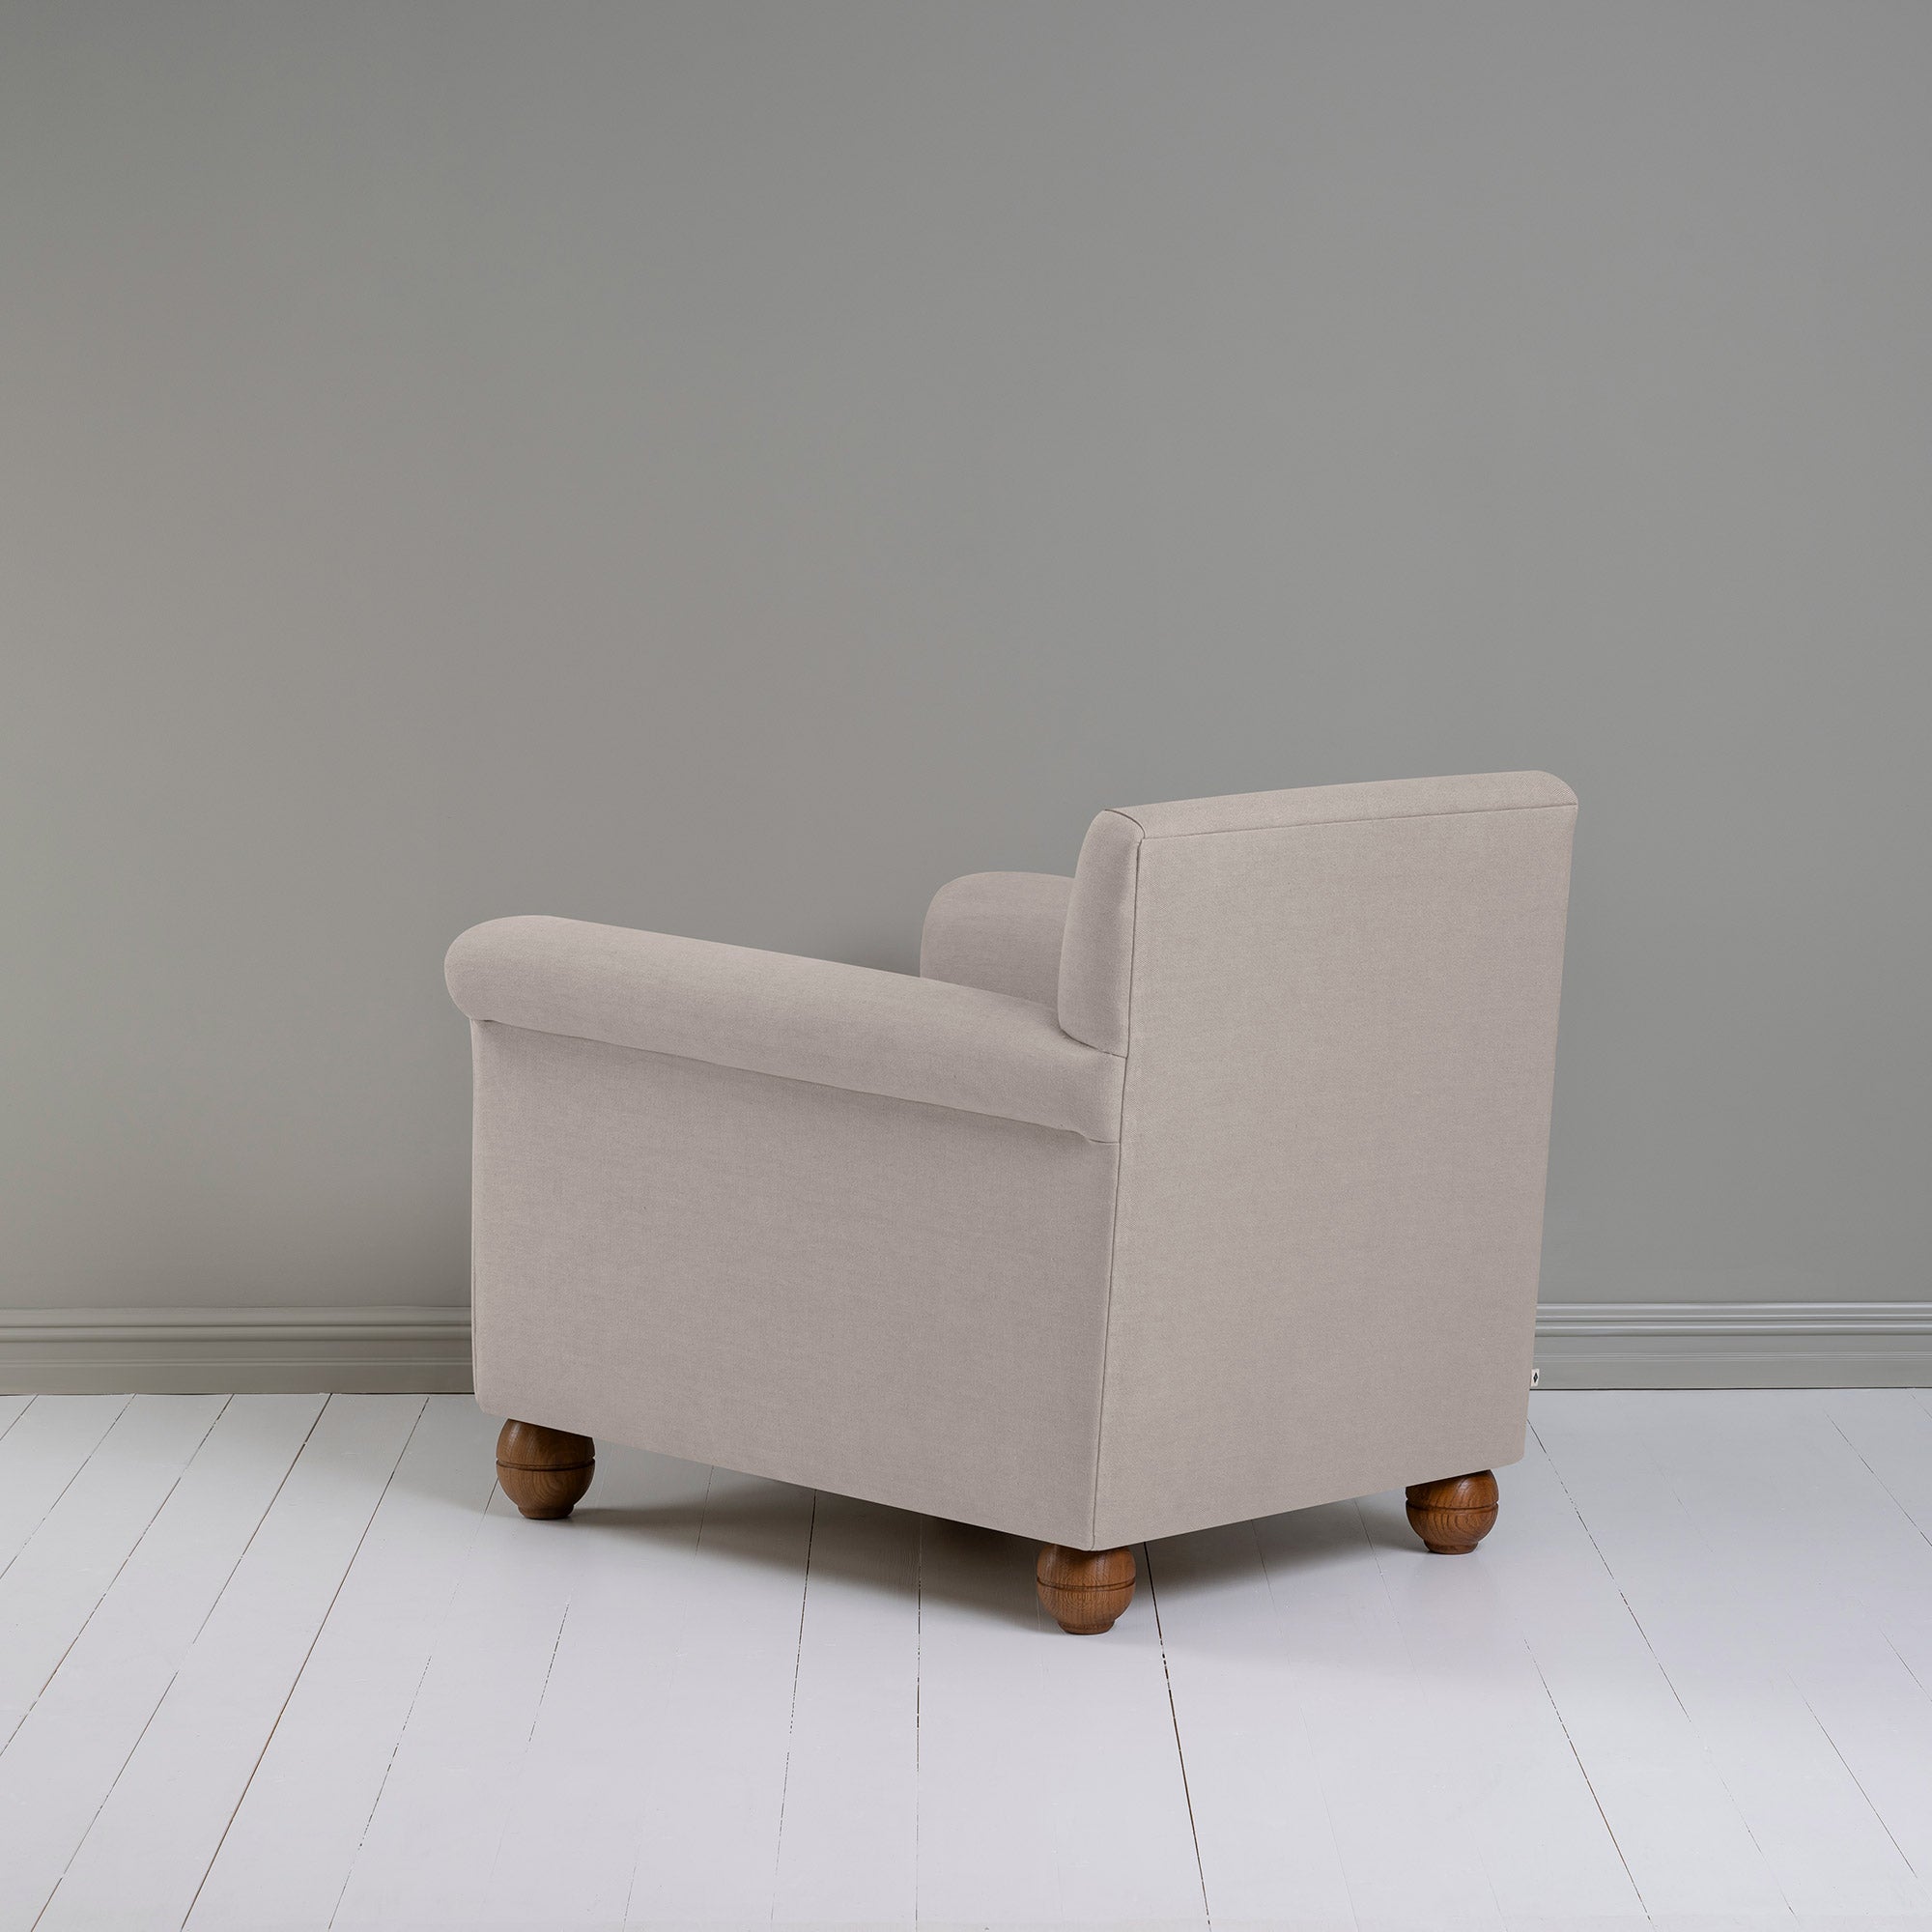  Idler Armchair in Laidback Linen Pearl Grey 